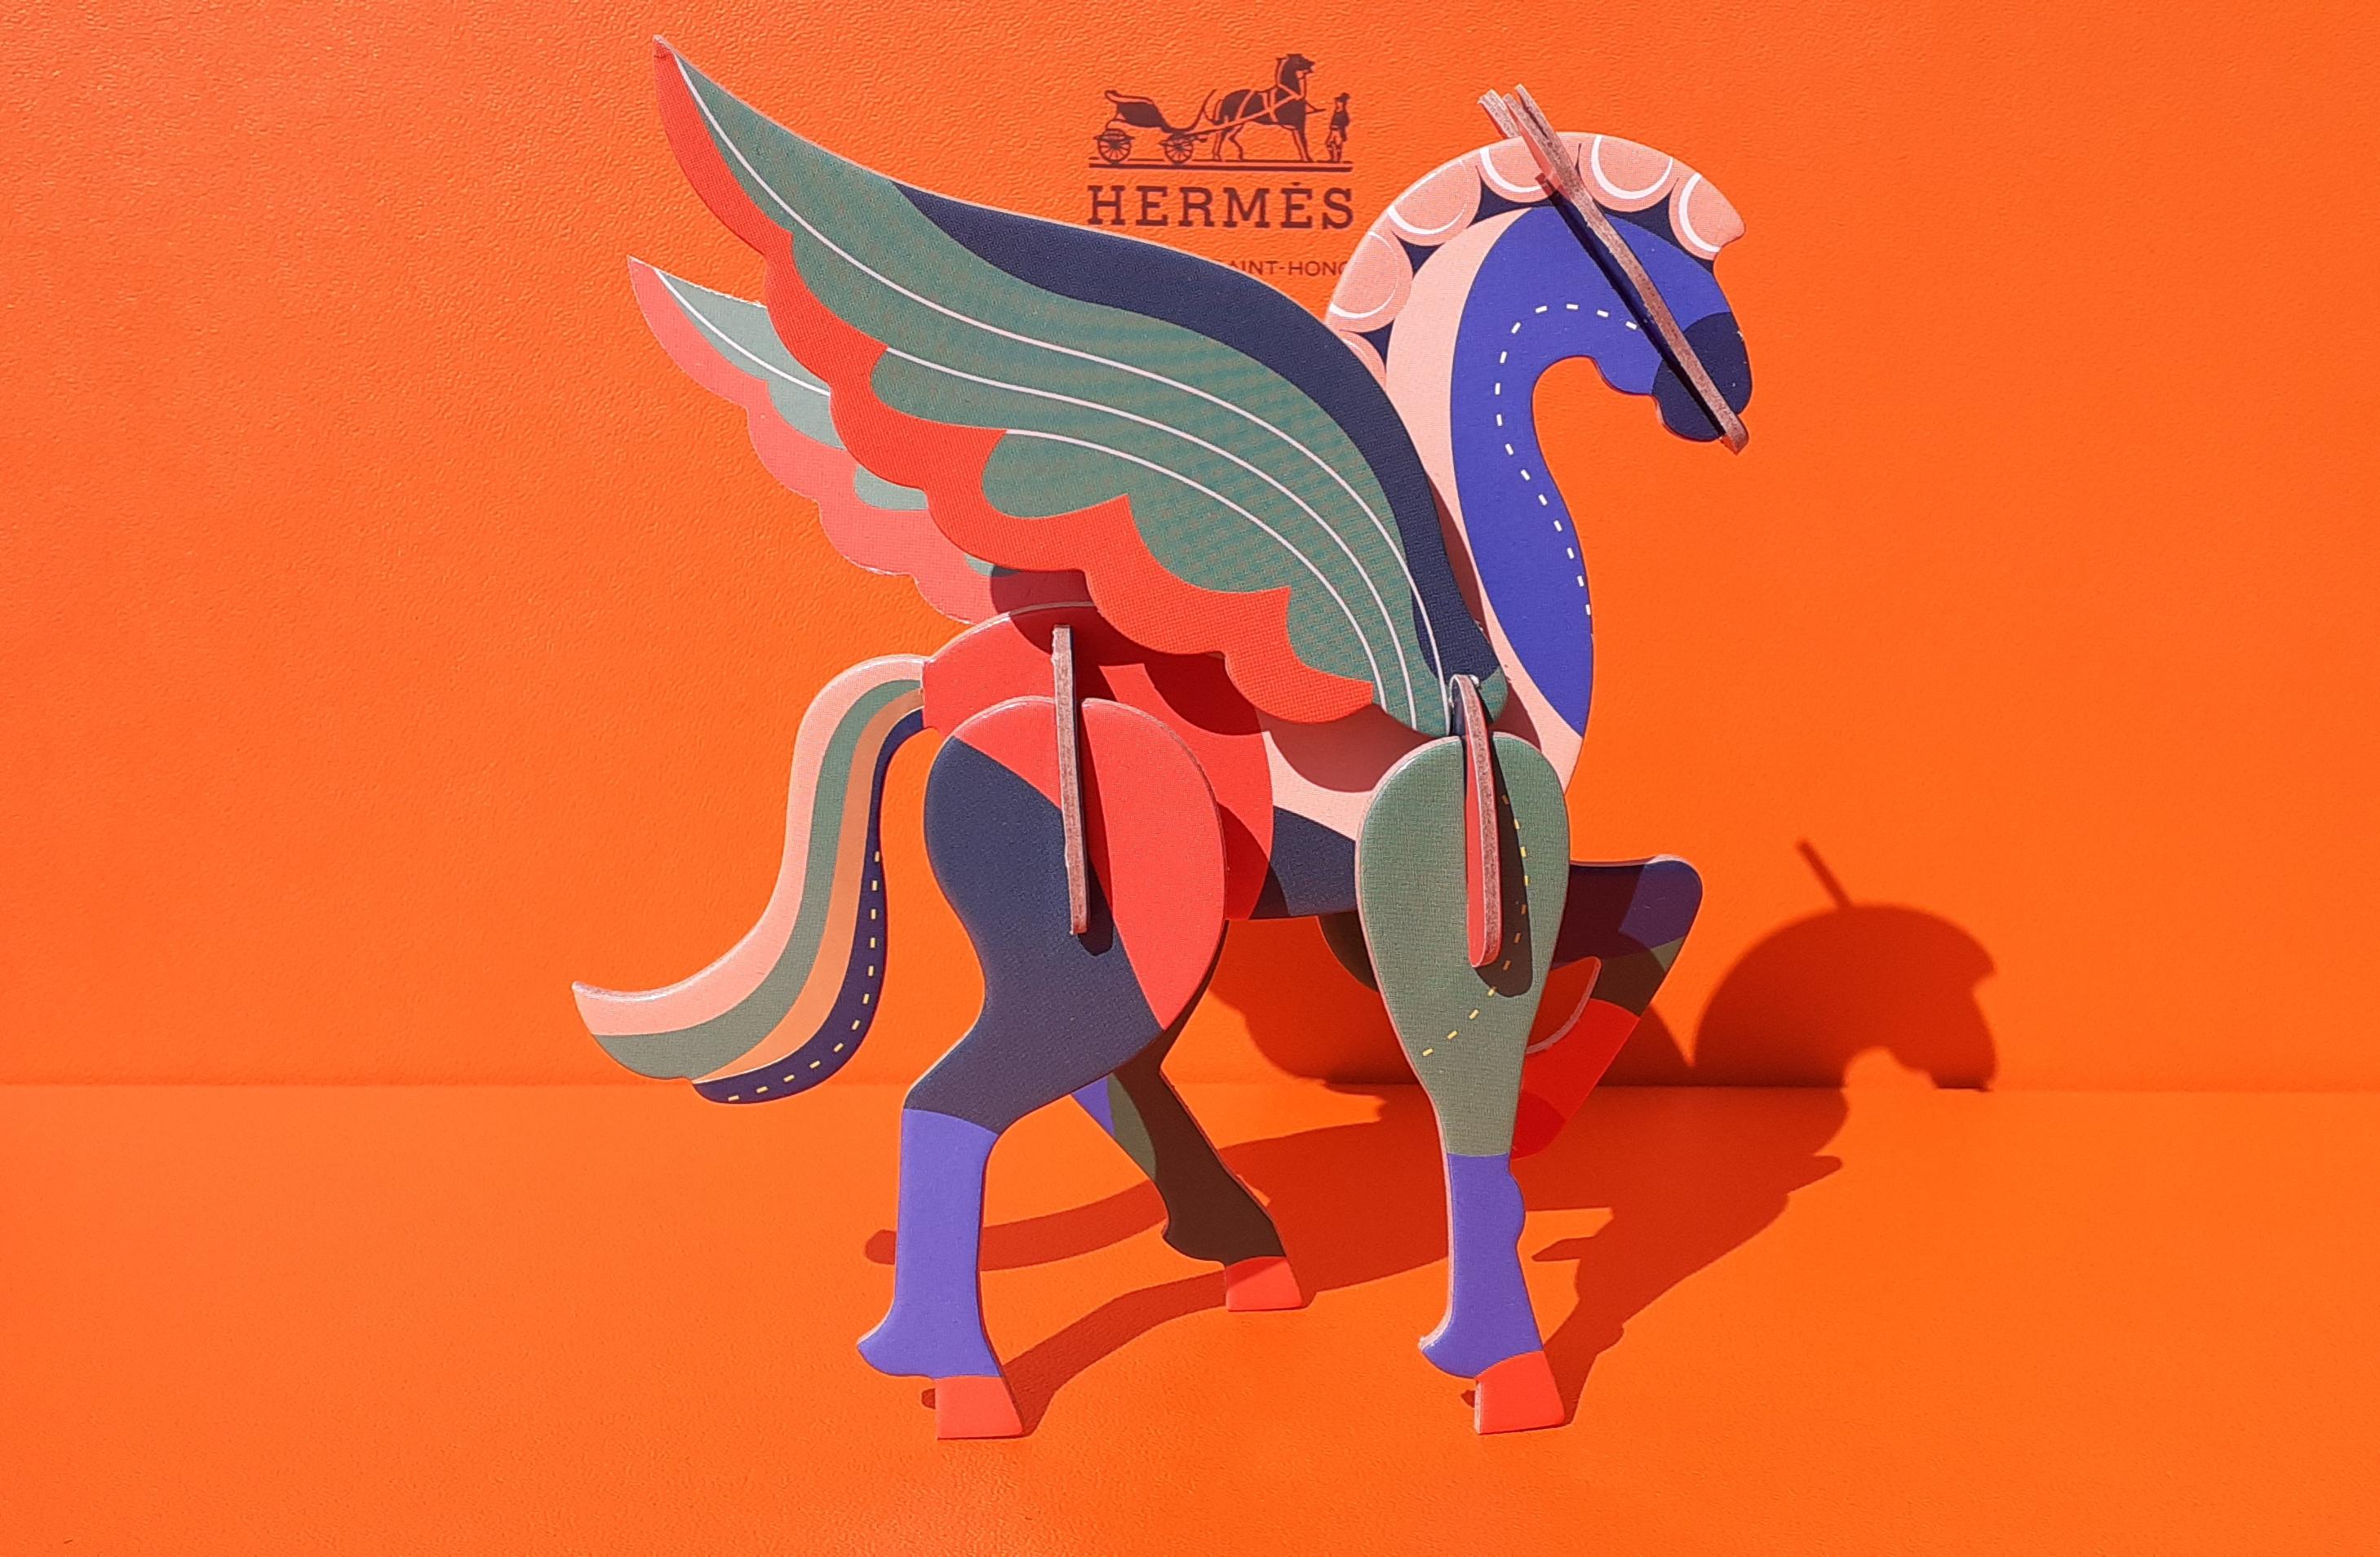 Super Cute Authentic Hermès Pegasus

Composed of 11 pieces of cardboard to assemble

A string will allow to suspend it

The assembly instructions are inside the packaging

Colorways: Pink, Blue, Green, and some golden in the tail !

Measurements